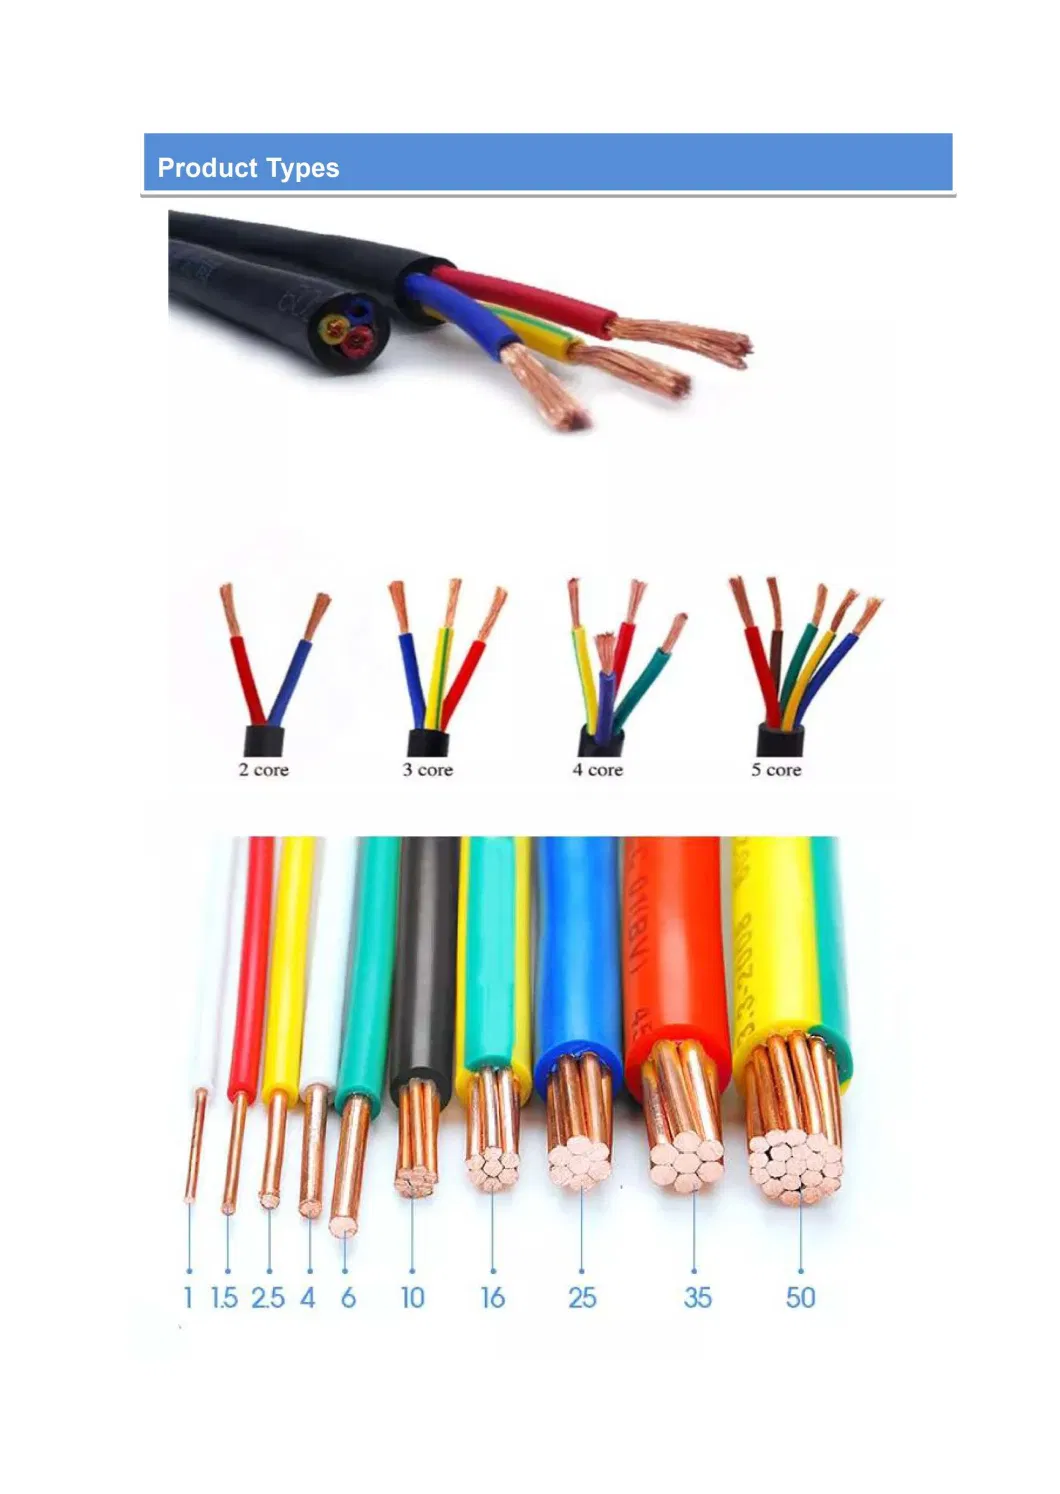 BV Thw Thhn Electrical Wire Cable 2.5mm 4mm 10mm 16mm Single Core PVC Insulated Copper Cable Wire